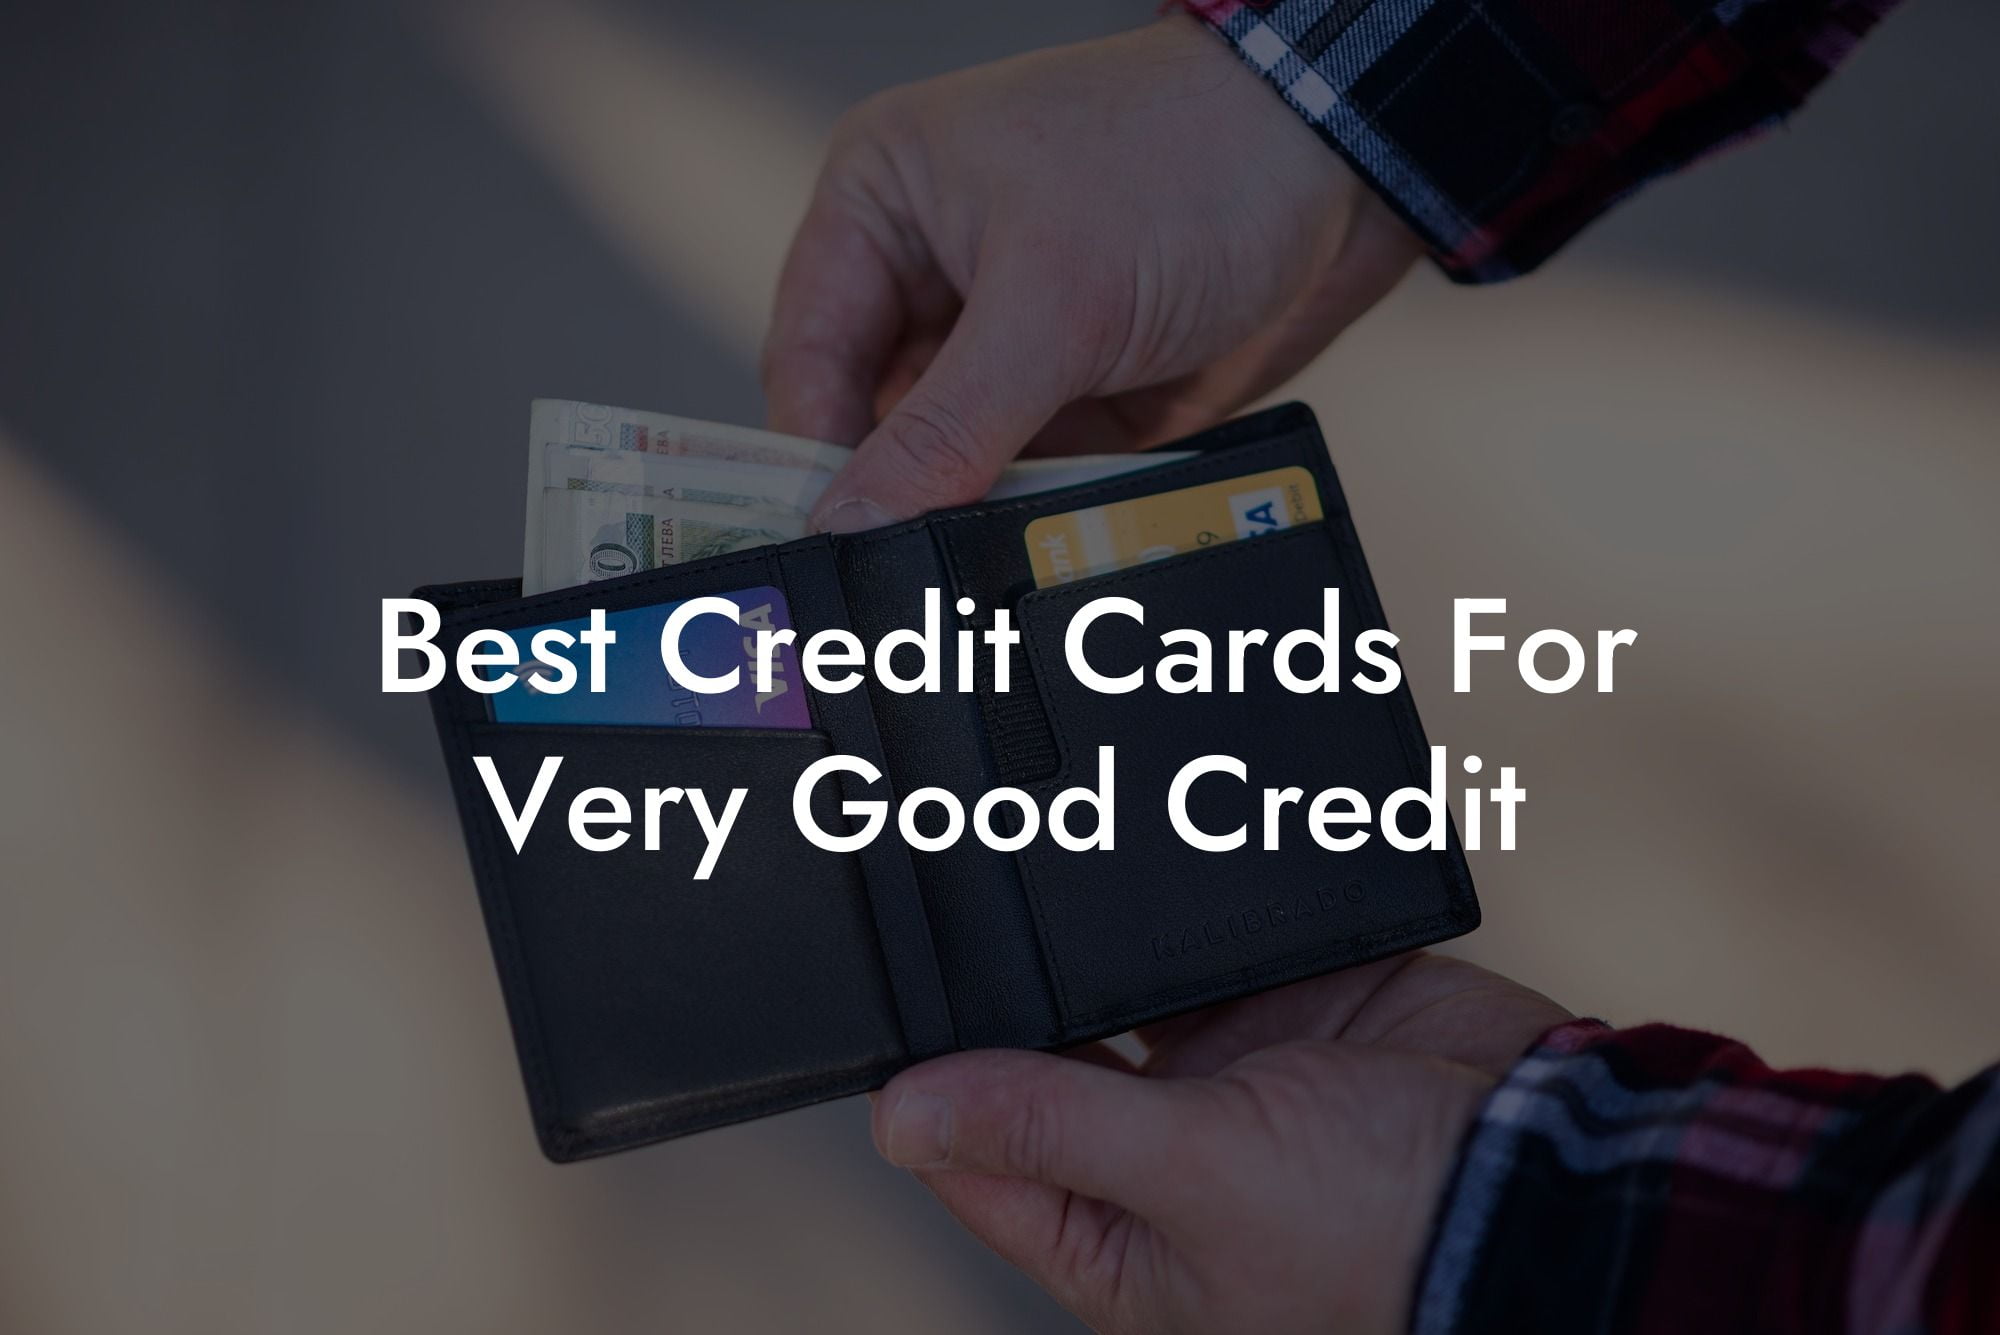 Best Credit Cards For Very Good Credit